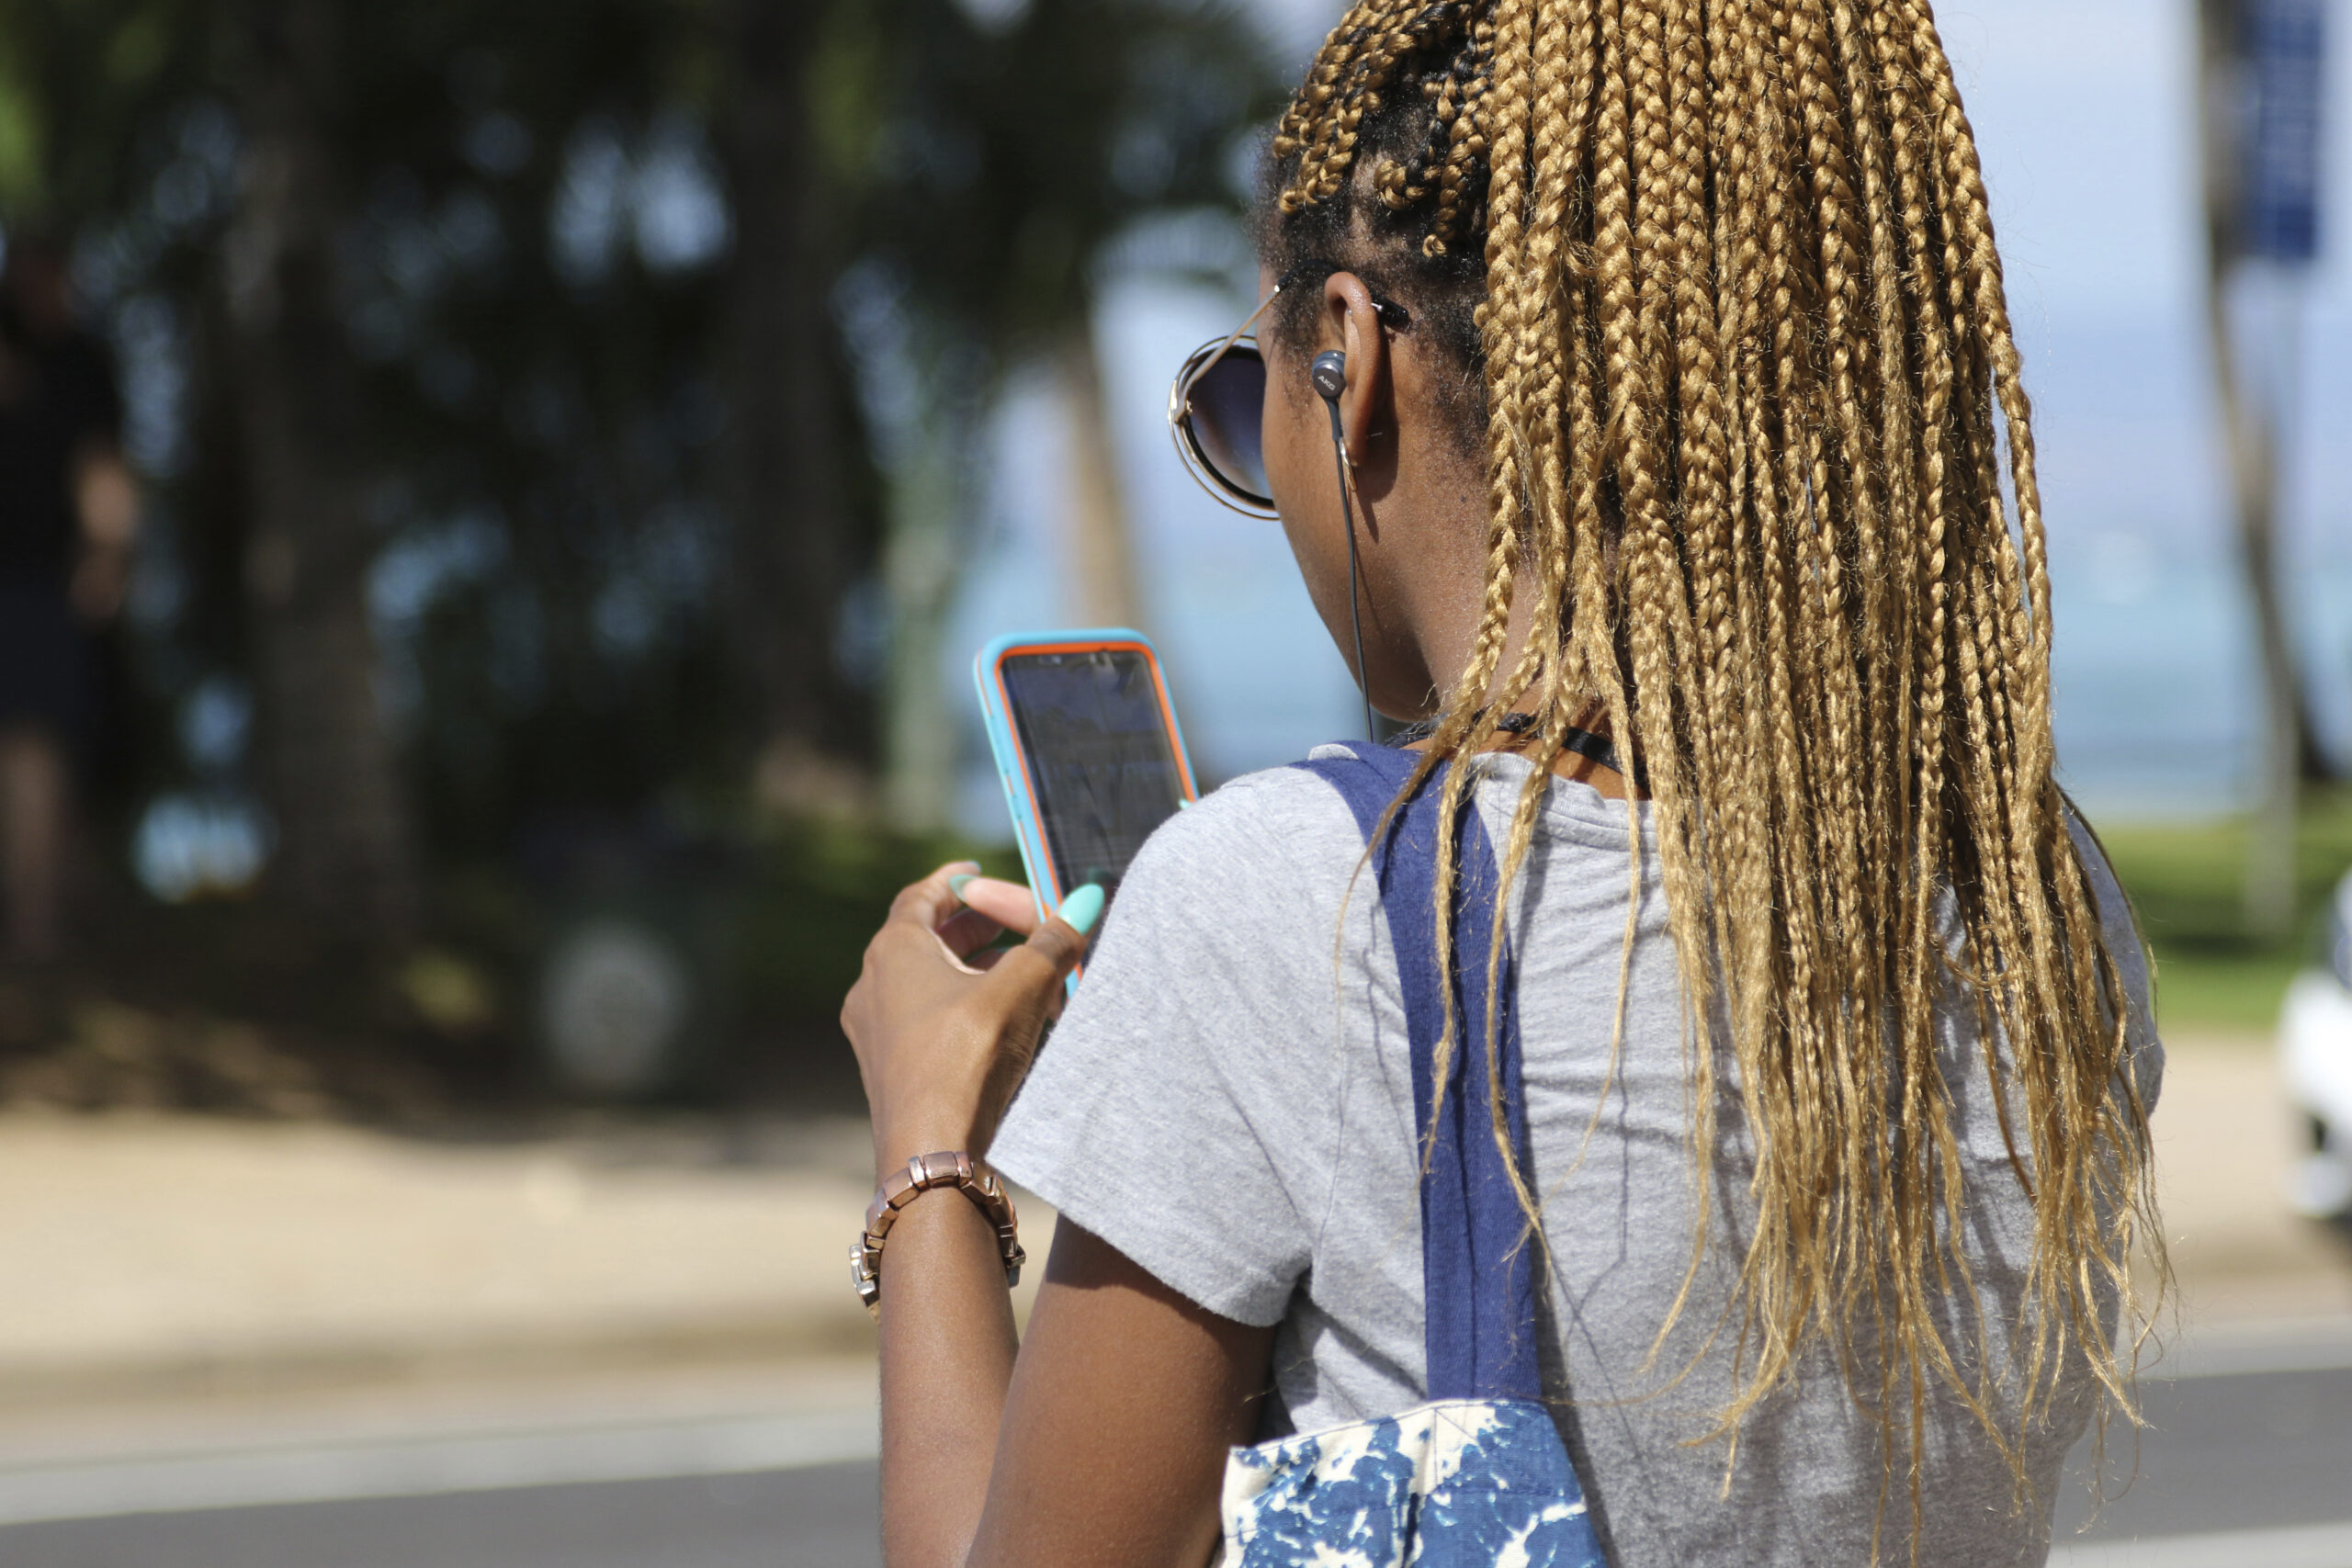 A woman walks away from the camera. Over her shoulder, it's seen that she's looking at a phone.